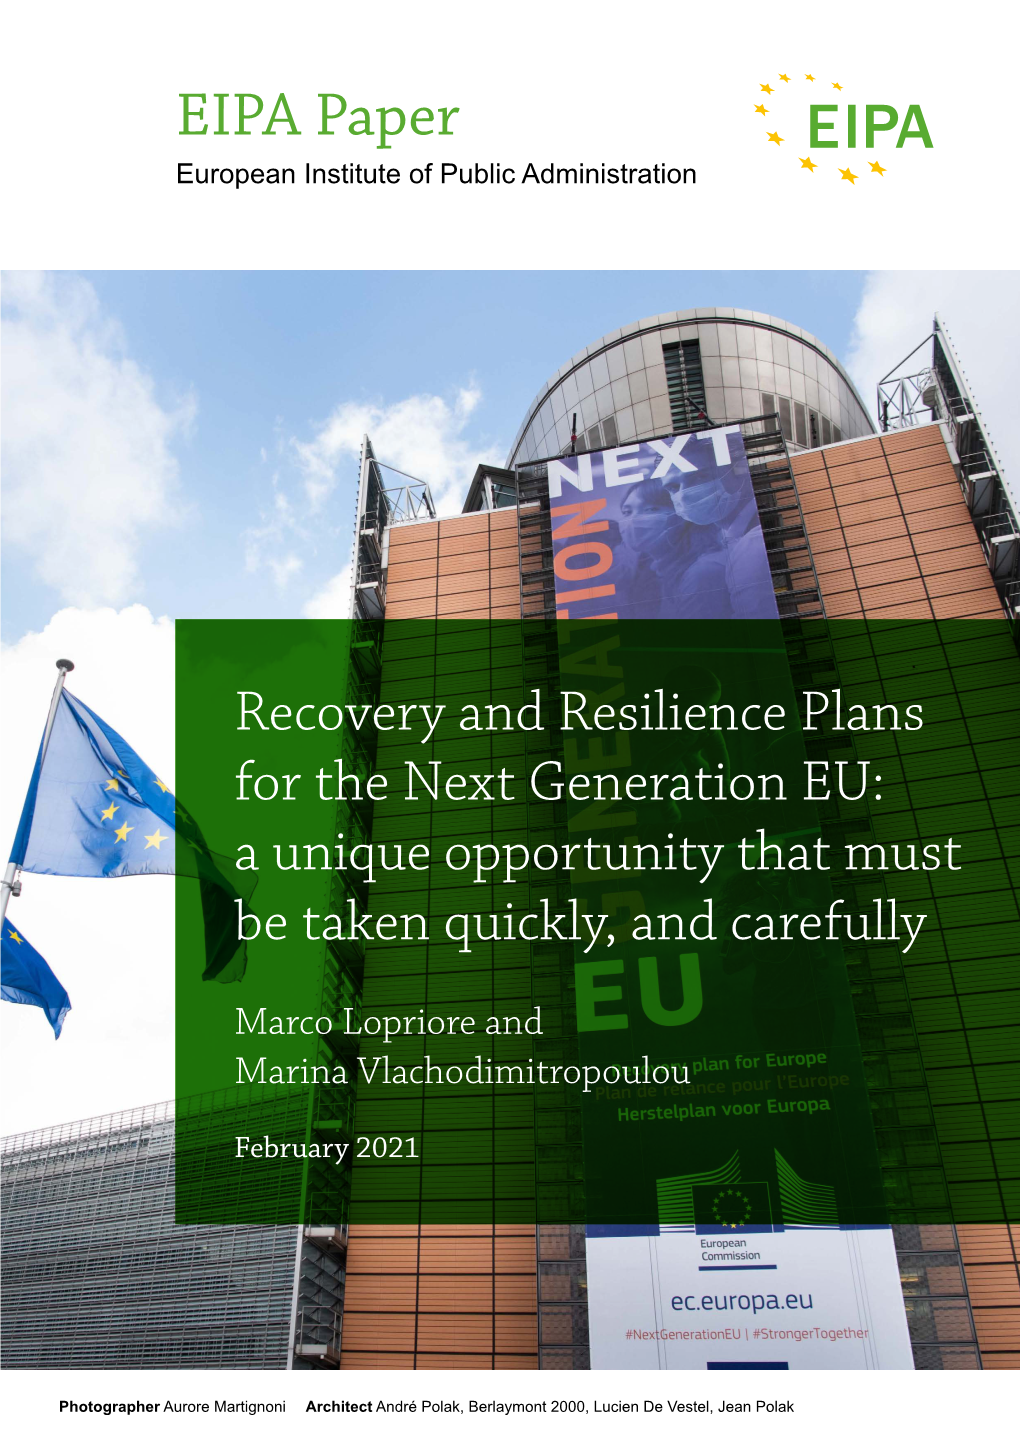 Recovery and Resilience Plans for the Next Generation EU: a Unique Opportunity That Must Be Taken Quickly, and Carefully